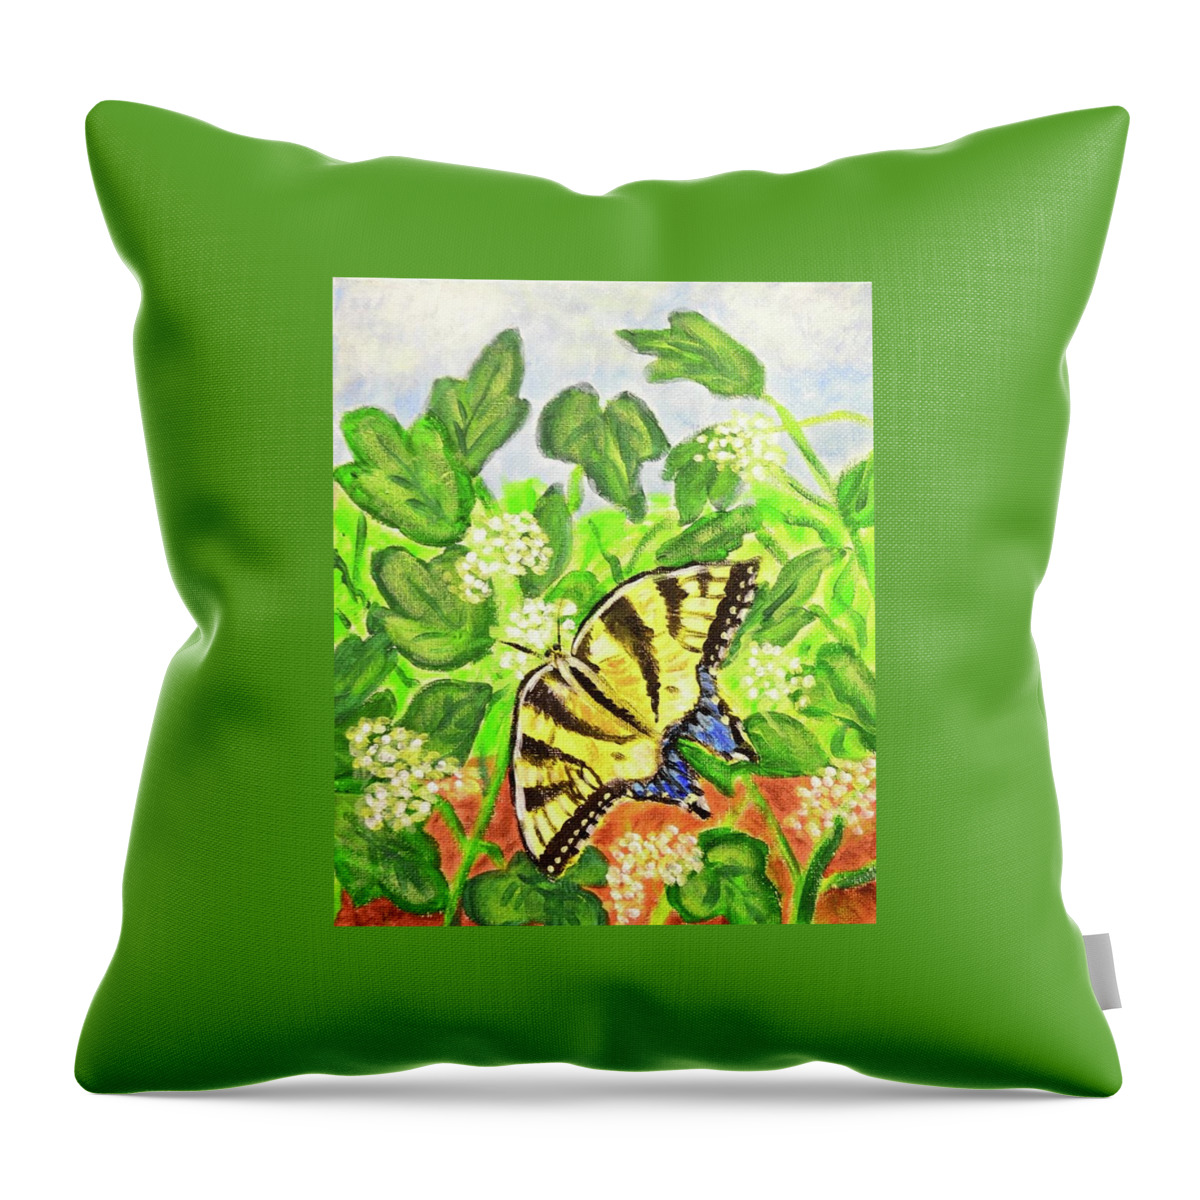 Butterfly Throw Pillow featuring the painting Butterfly by Nancy Sisco